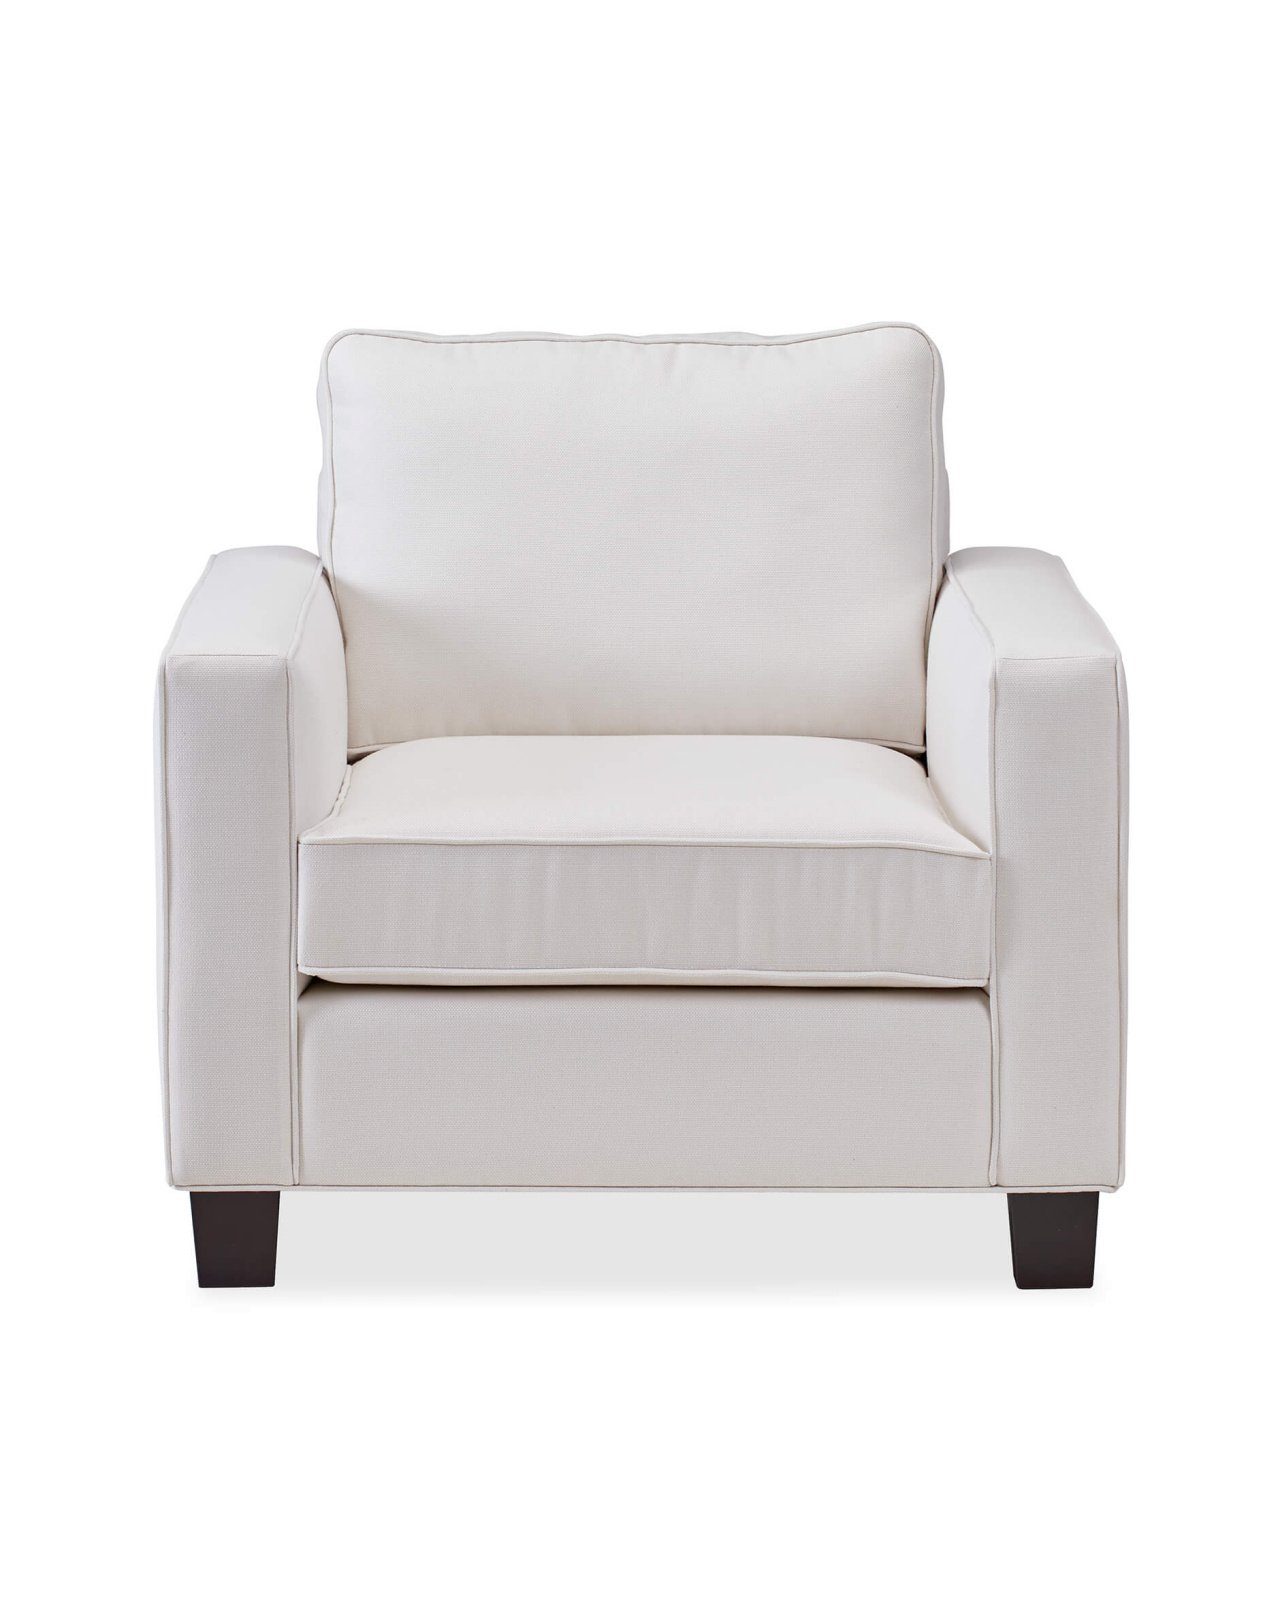 Plaza armchair off-white